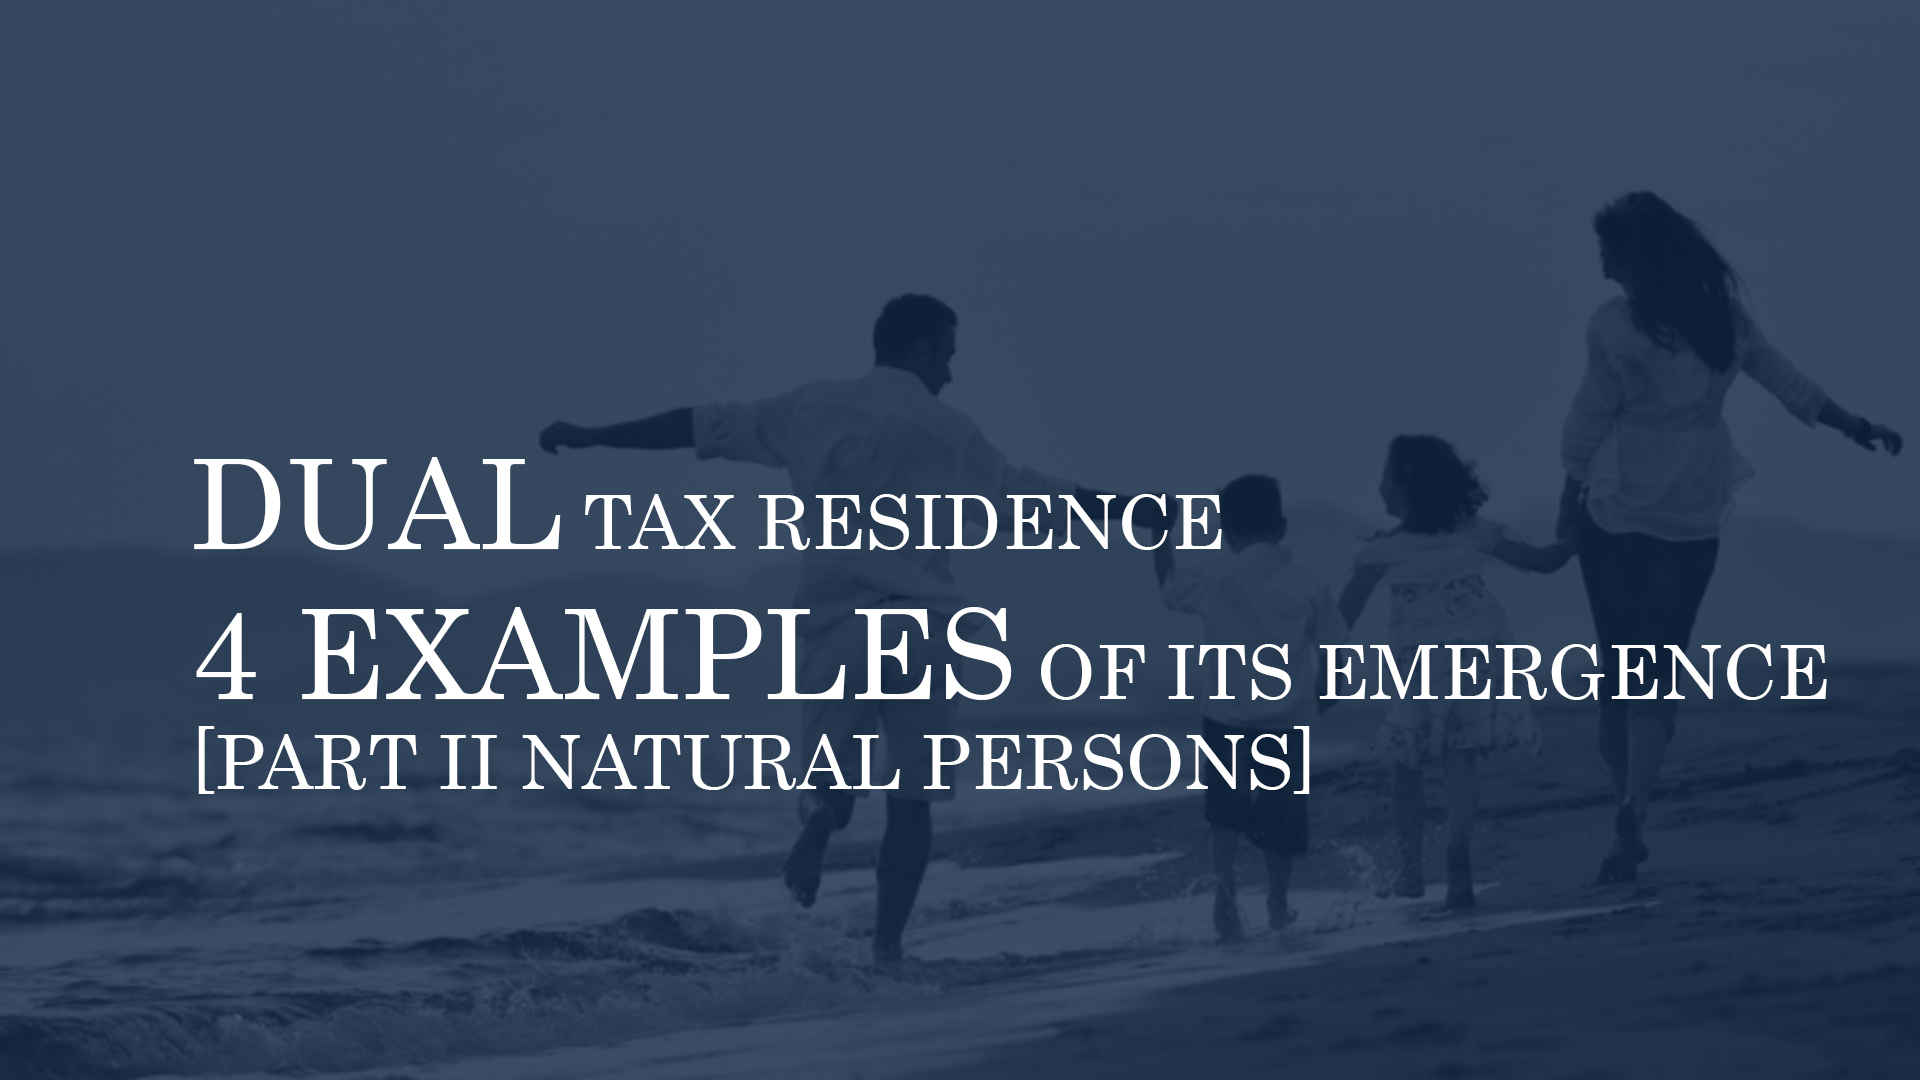 DUAL TAX RESIDENCE – 4 EXAMPLES OF ITS EMERGENCE  [PART II NATURAL PERSONS]